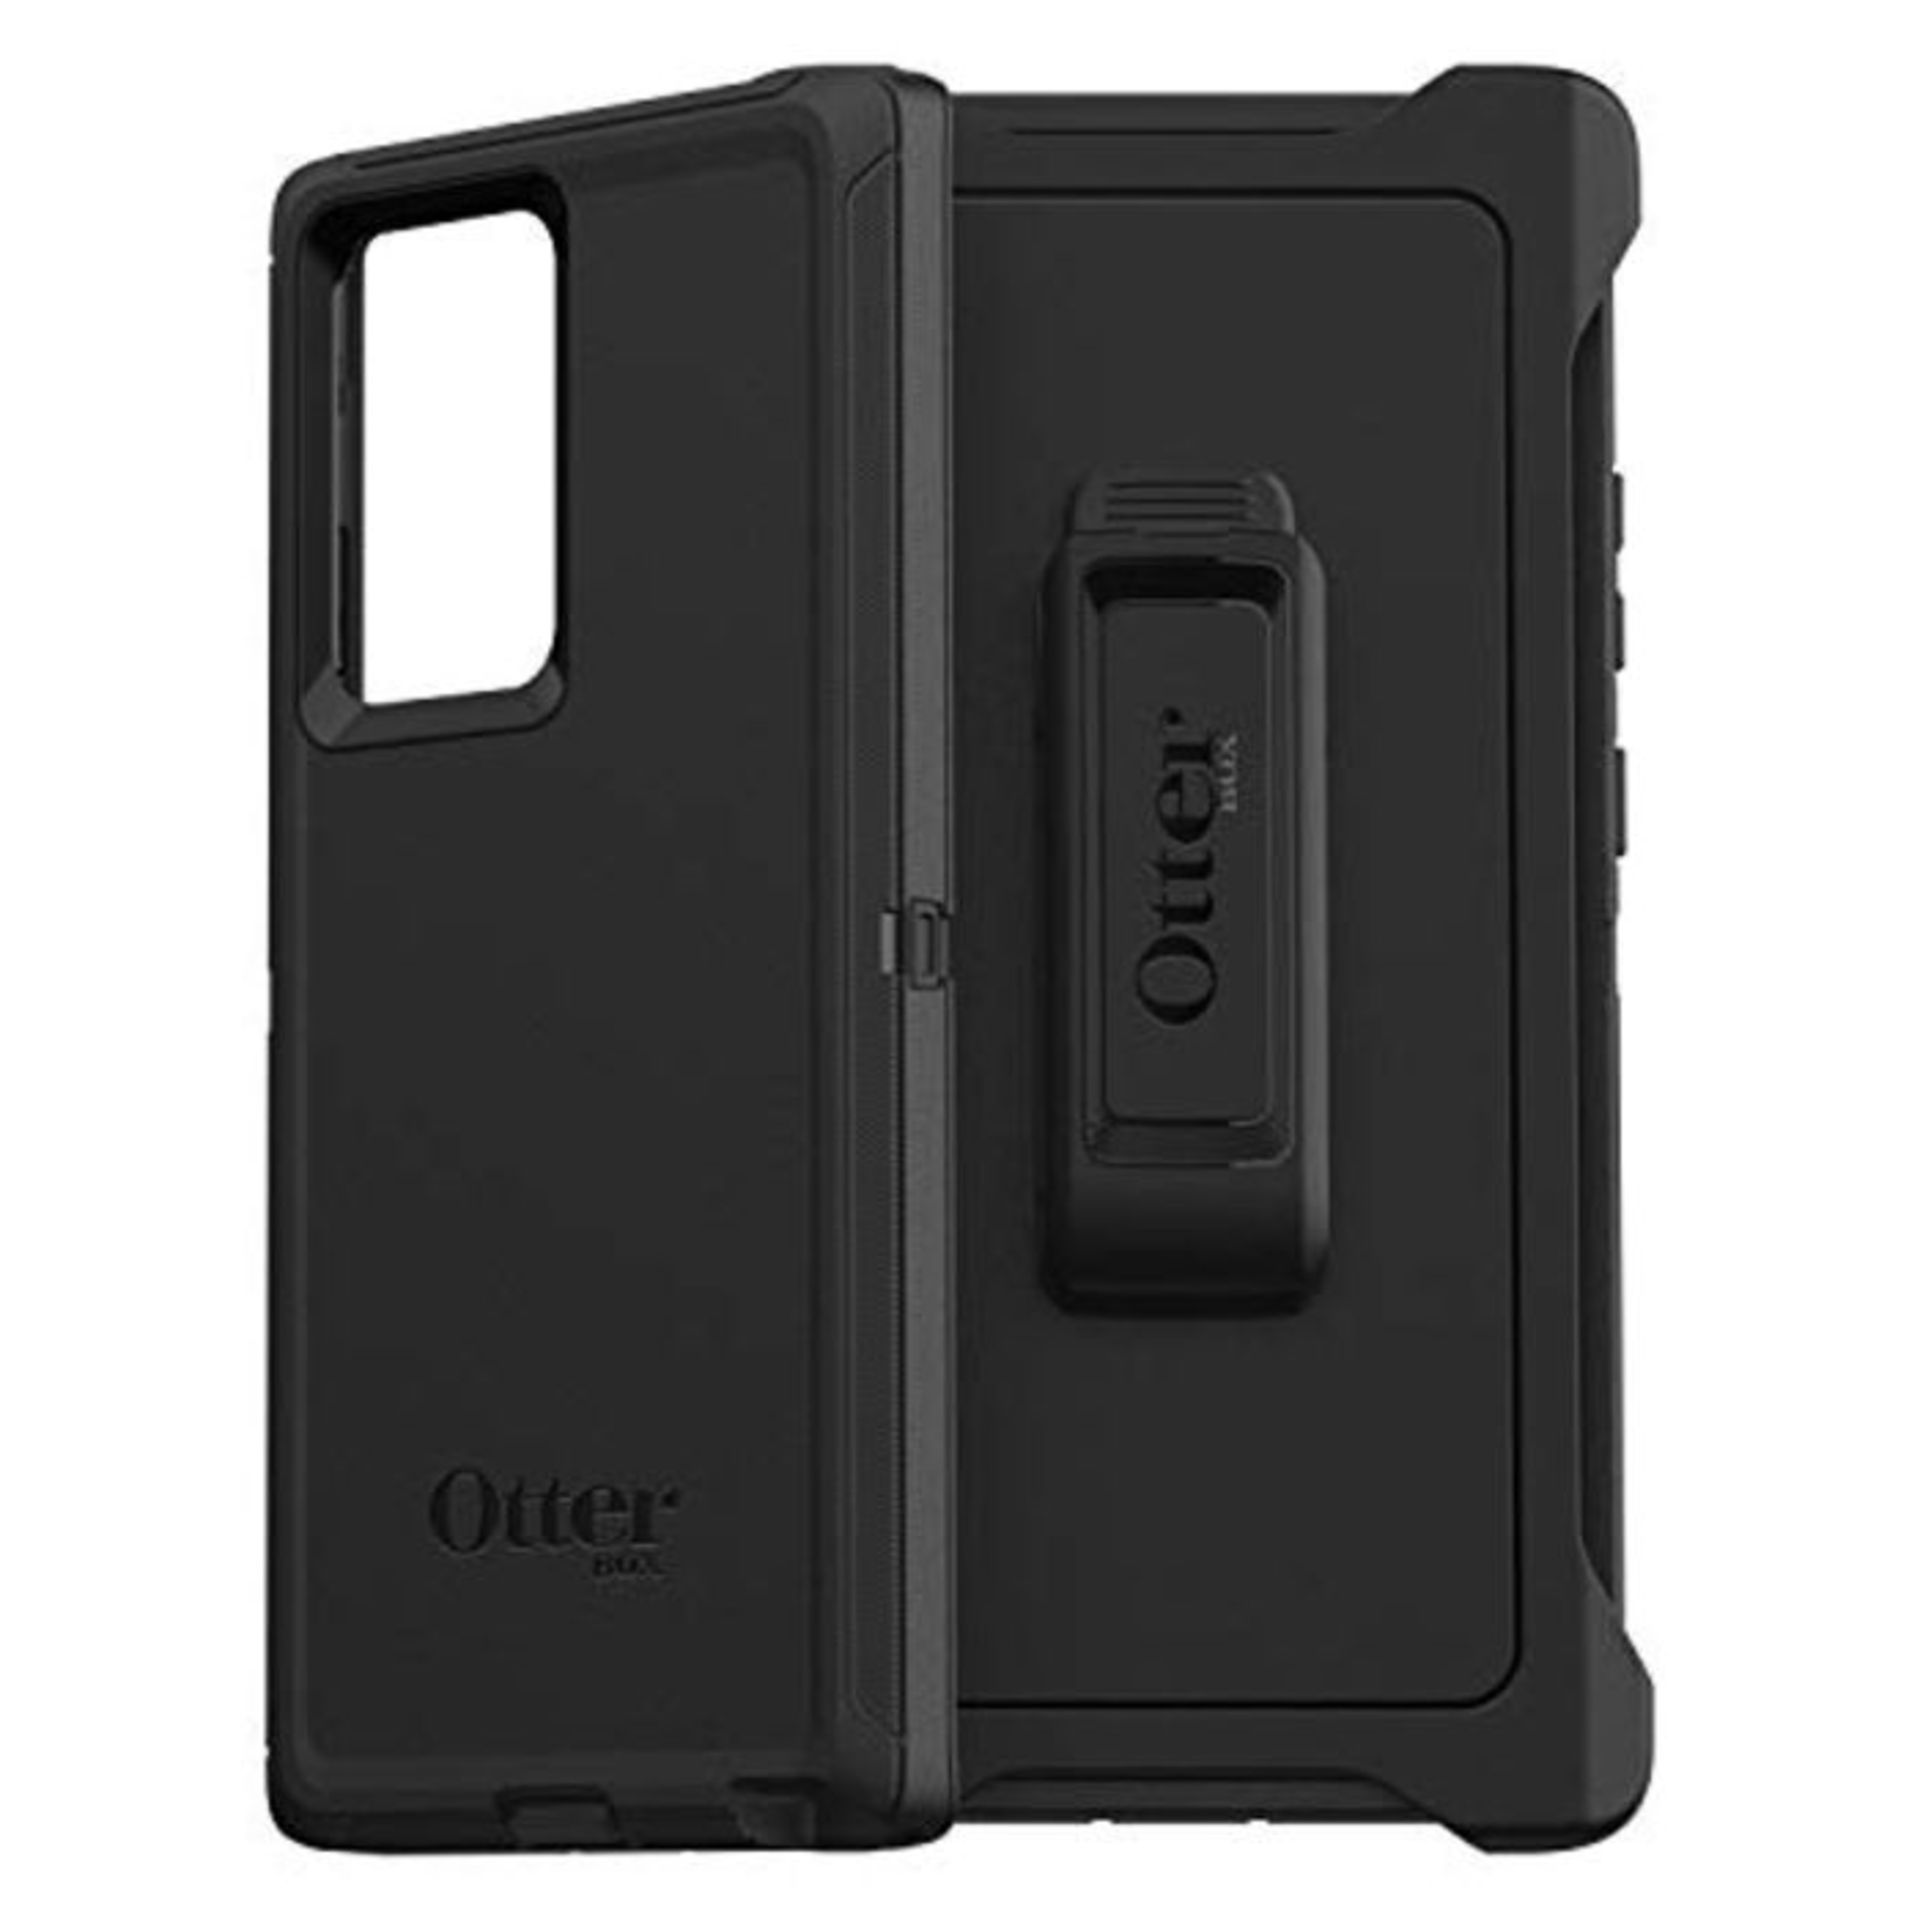 OtterBox for Samsung Galaxy Note 20 Ultra 5G, Superior Rugged Protective Case, Defende